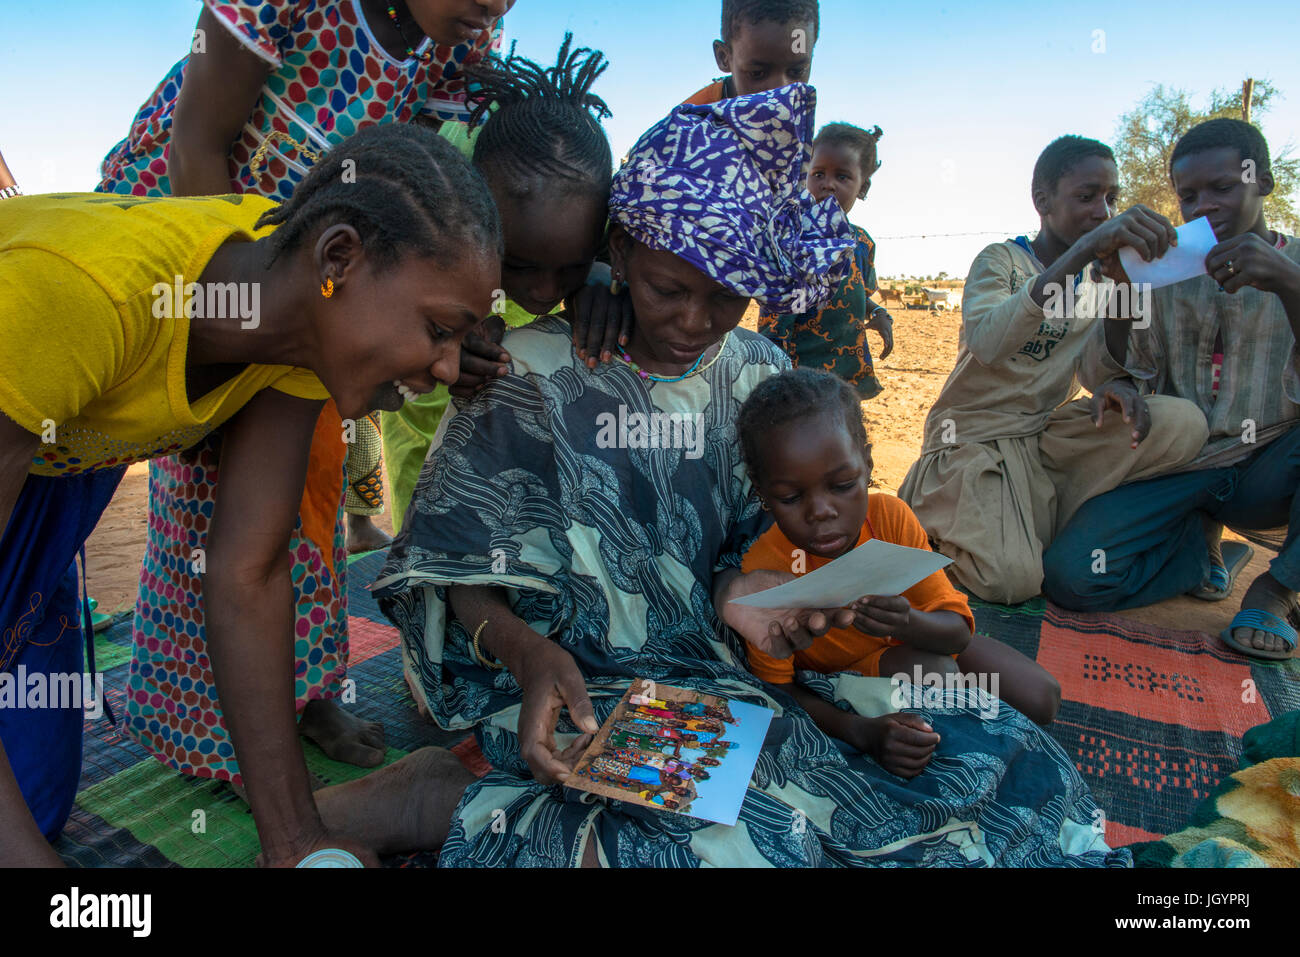 African villagers looking at photographs of themselves. Senegal. Stock Photo